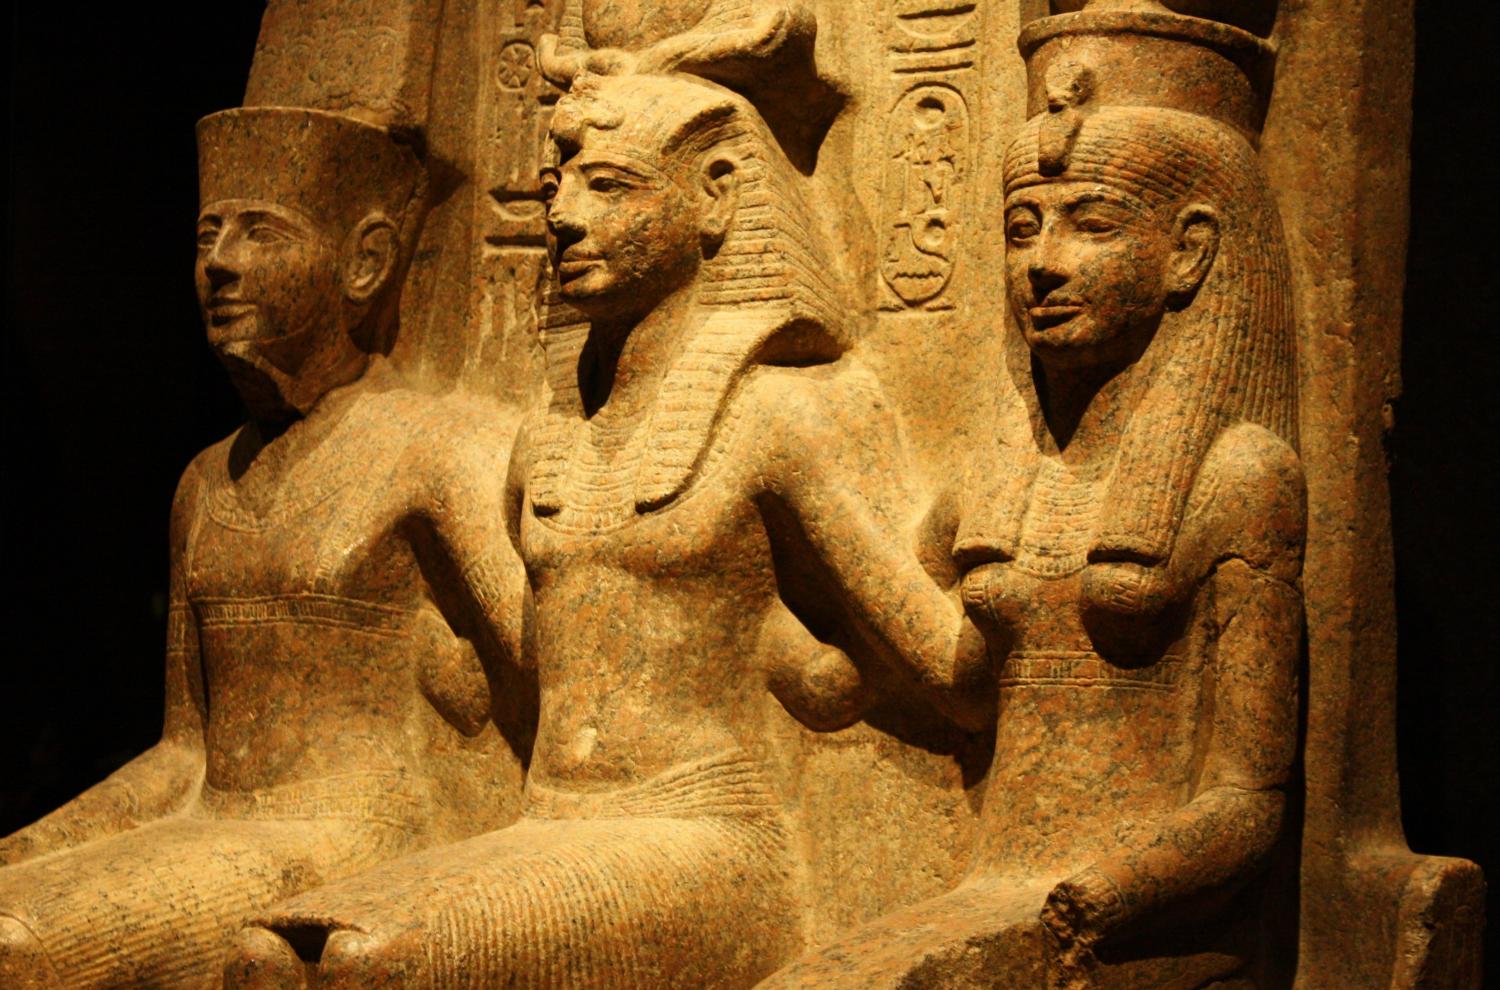 A granite monument depicting the god Amun, Ramesses II, & the goddess Mut from the Temple of Amun in Thebes. Image by Mark Cartwright, courtesy World History Encyclopedia, CC BY-NC-SA 4.0.